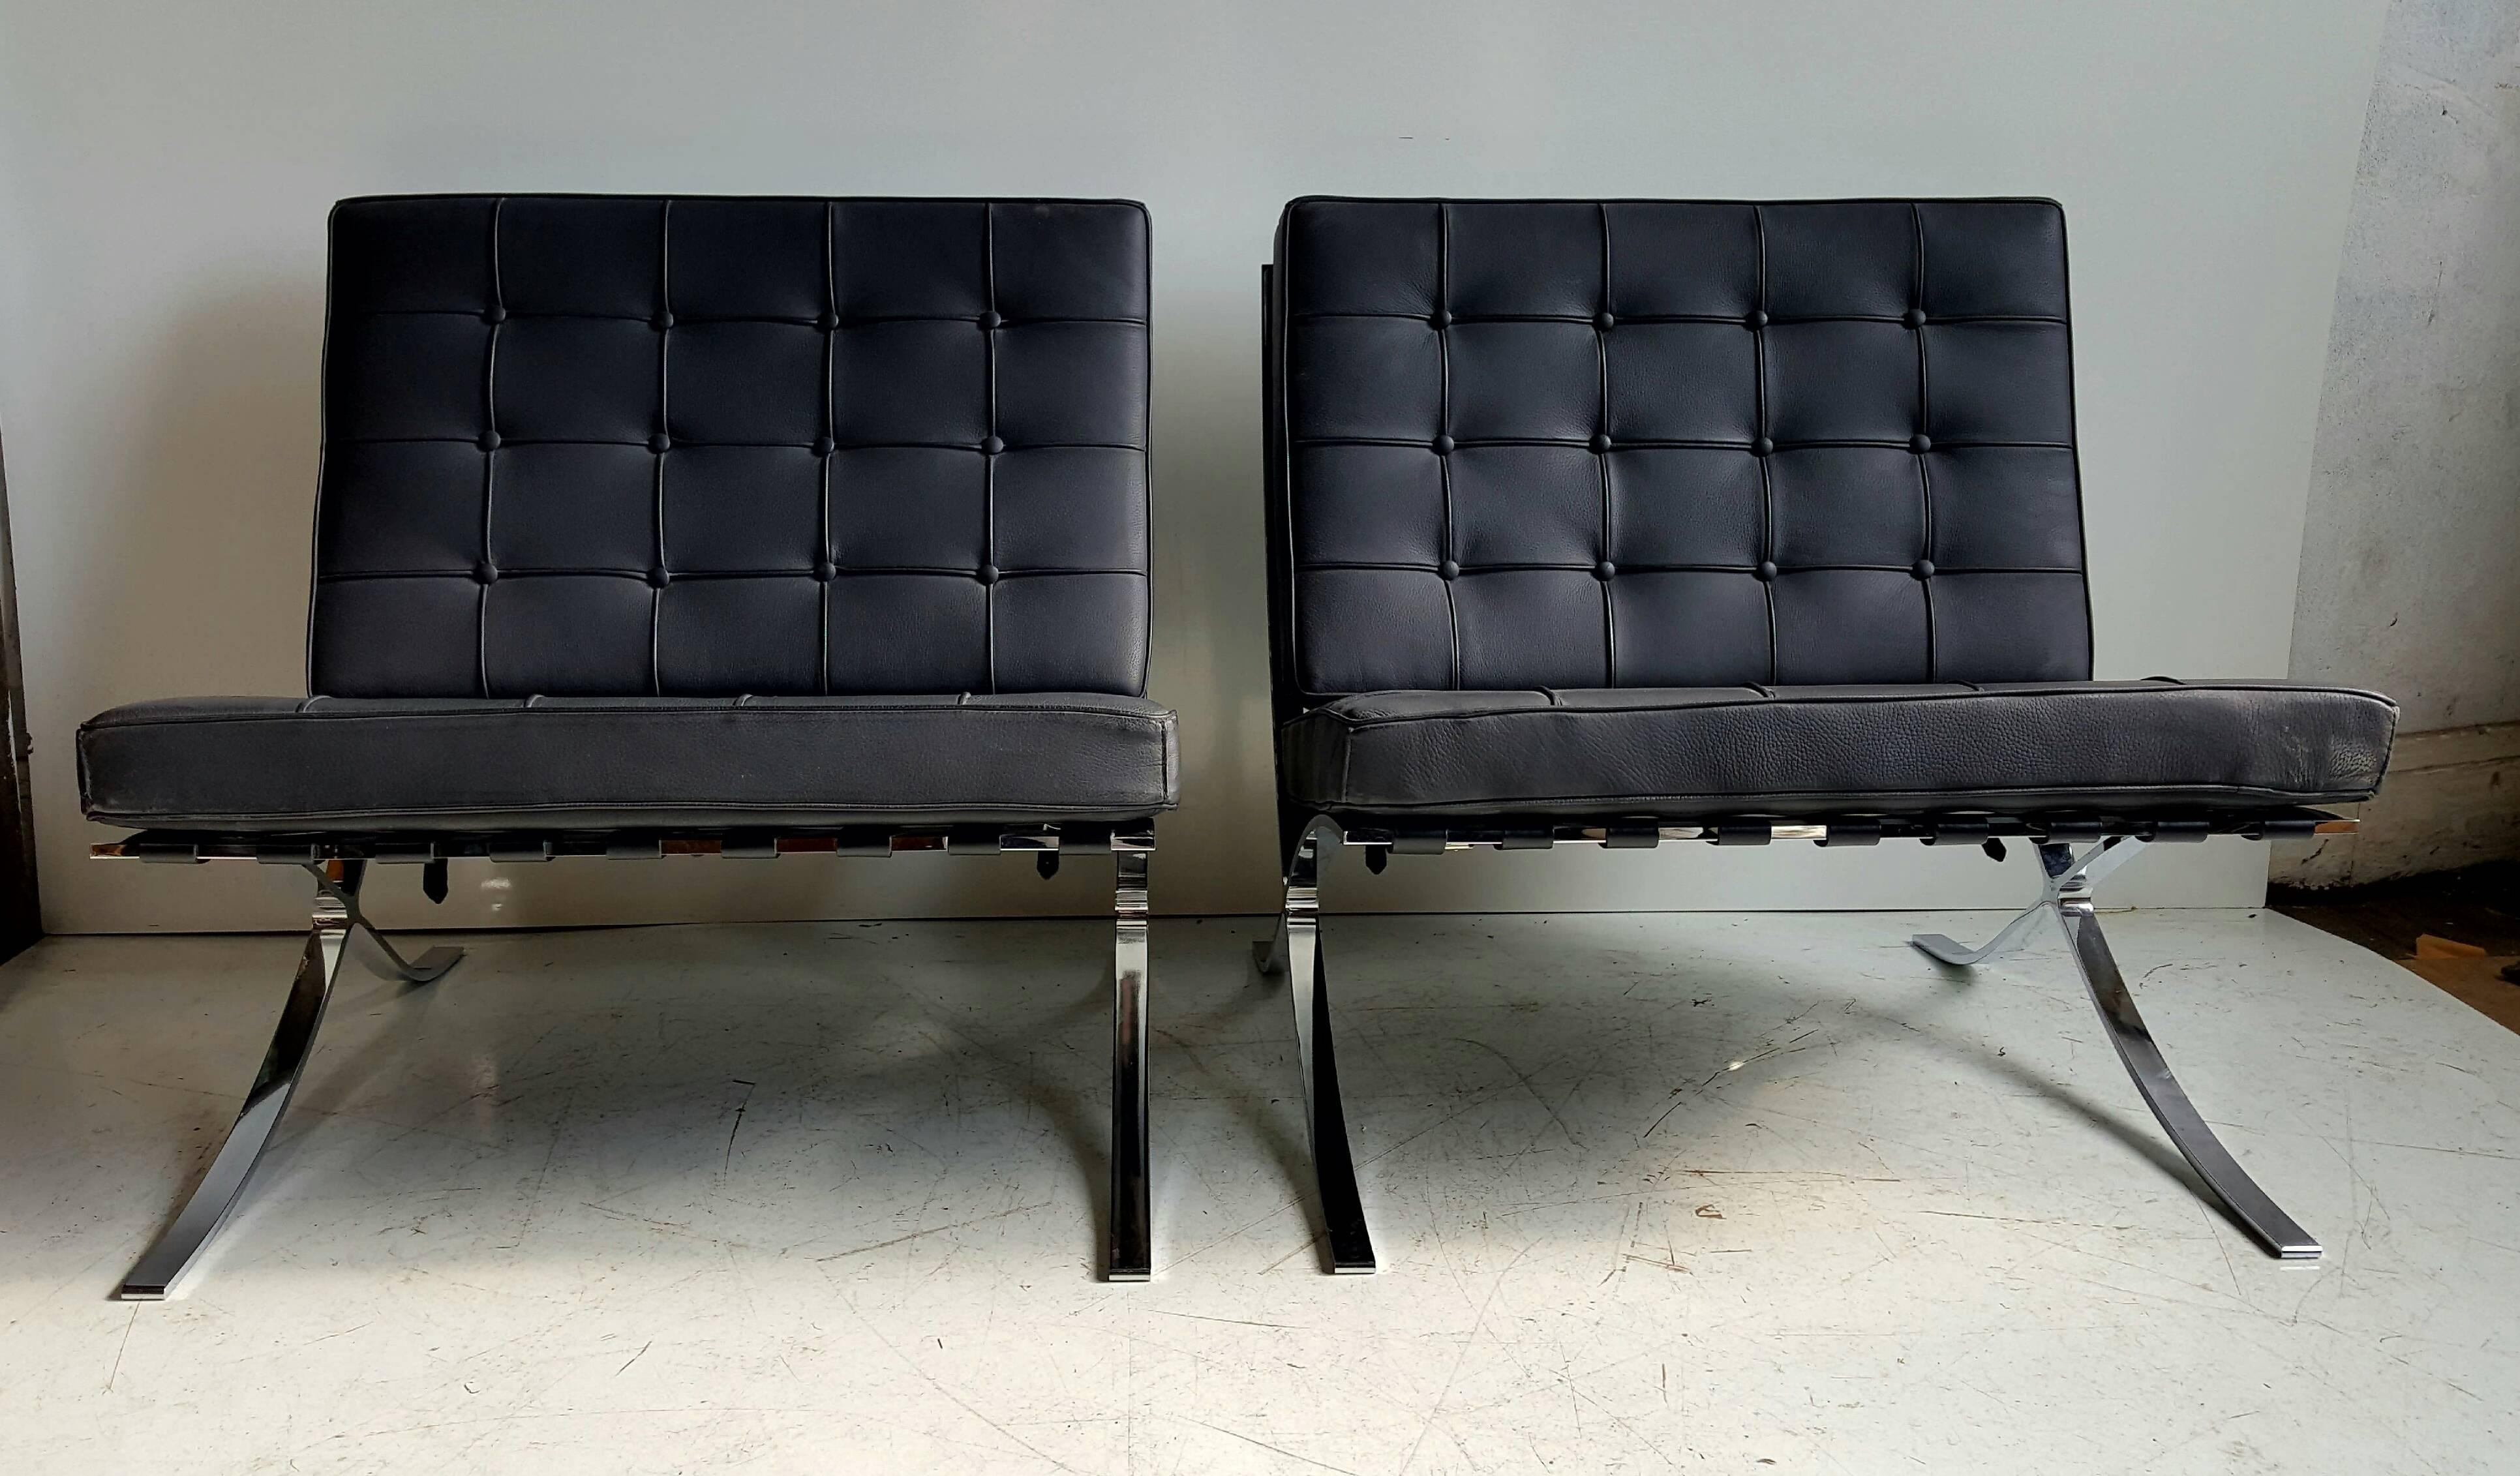 Classic pair Modernist Barcelona chairs, designed by Mies van der Rohe, made in Italy. Superb quality, wonderful original condition. Black leather signed made in Italy to bottom side. Quality chrome frames in mint original condition.